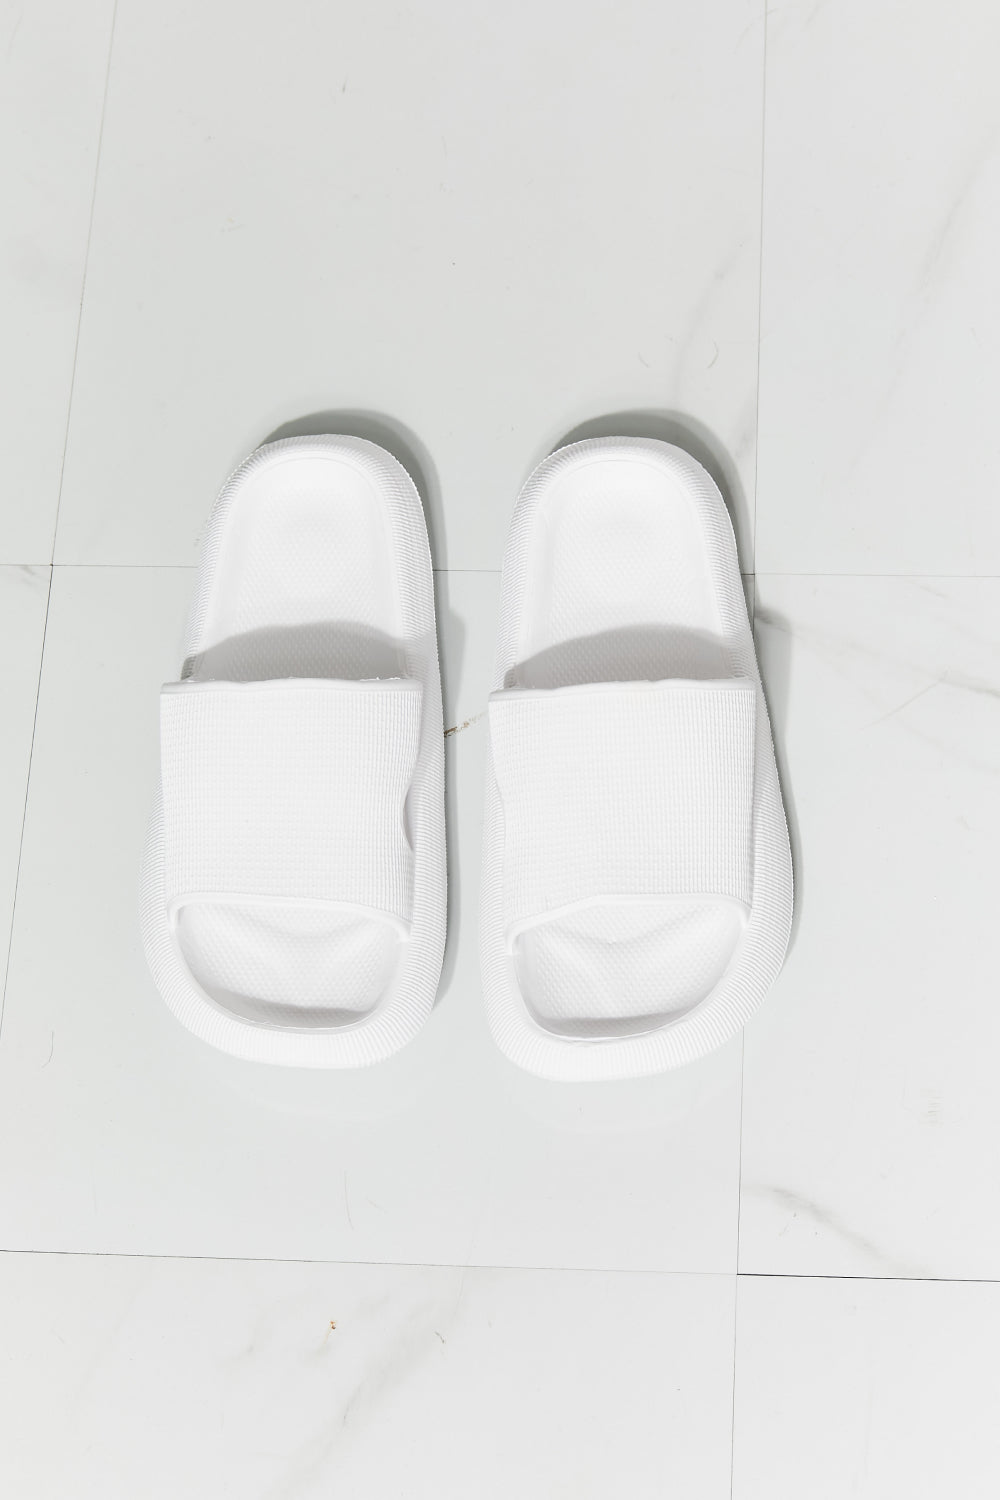 MMShoes Arms Around Me Open Toe Slide in White - Luv Lush